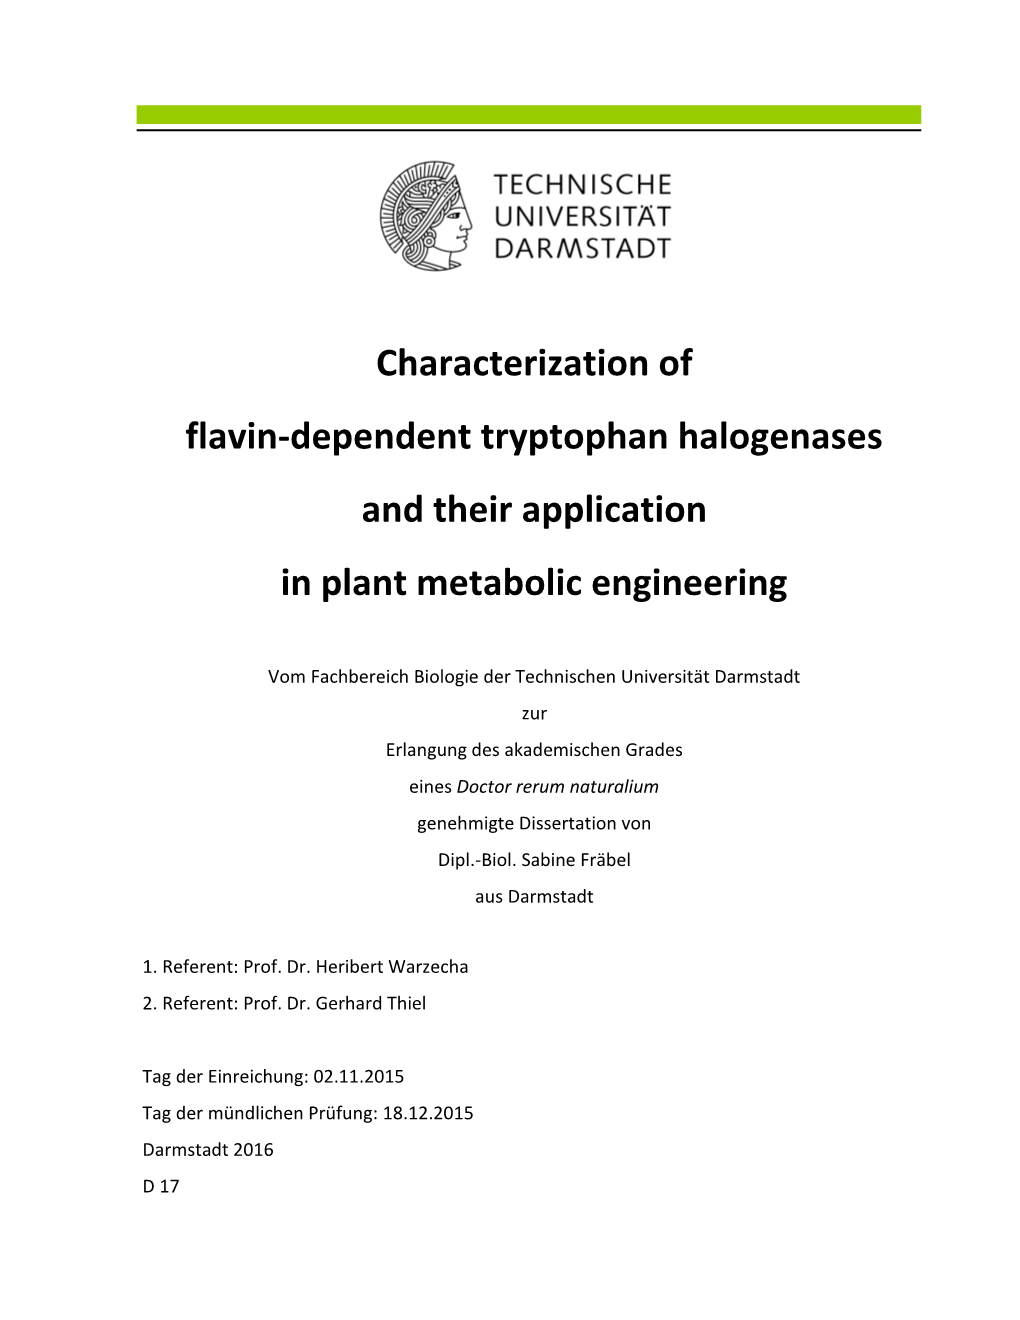 Characterization of Flavin-Dependent Tryptophan Halogenases and Their Application in Plant Metabolic Engineering